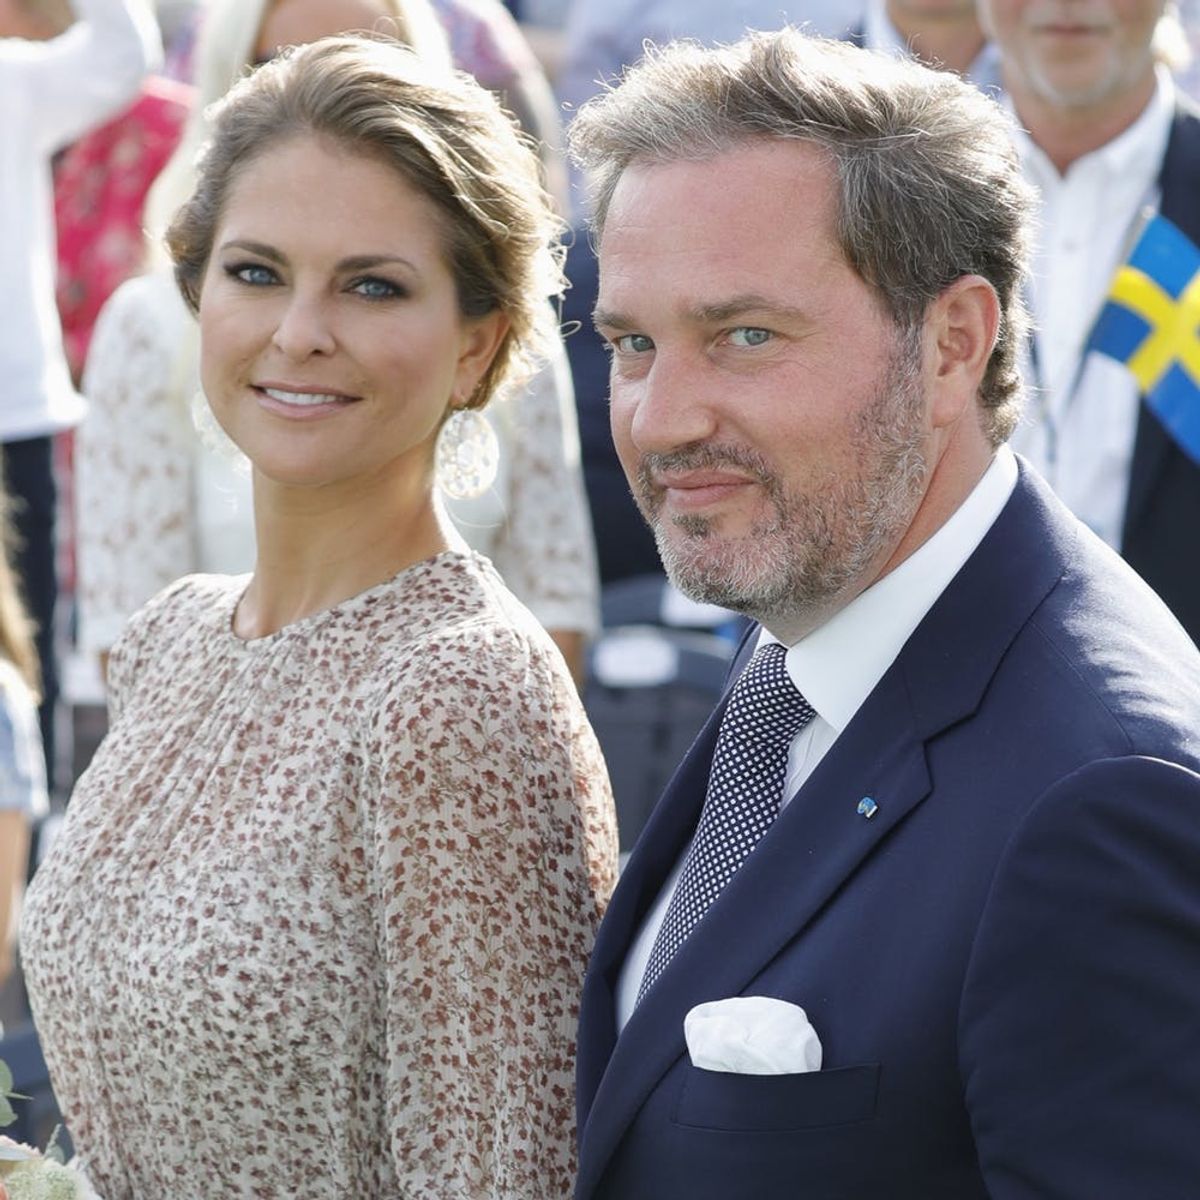 A New Royal Baby Has Arrived! Princess Madeleine of Sweden Welcomes Baby #3